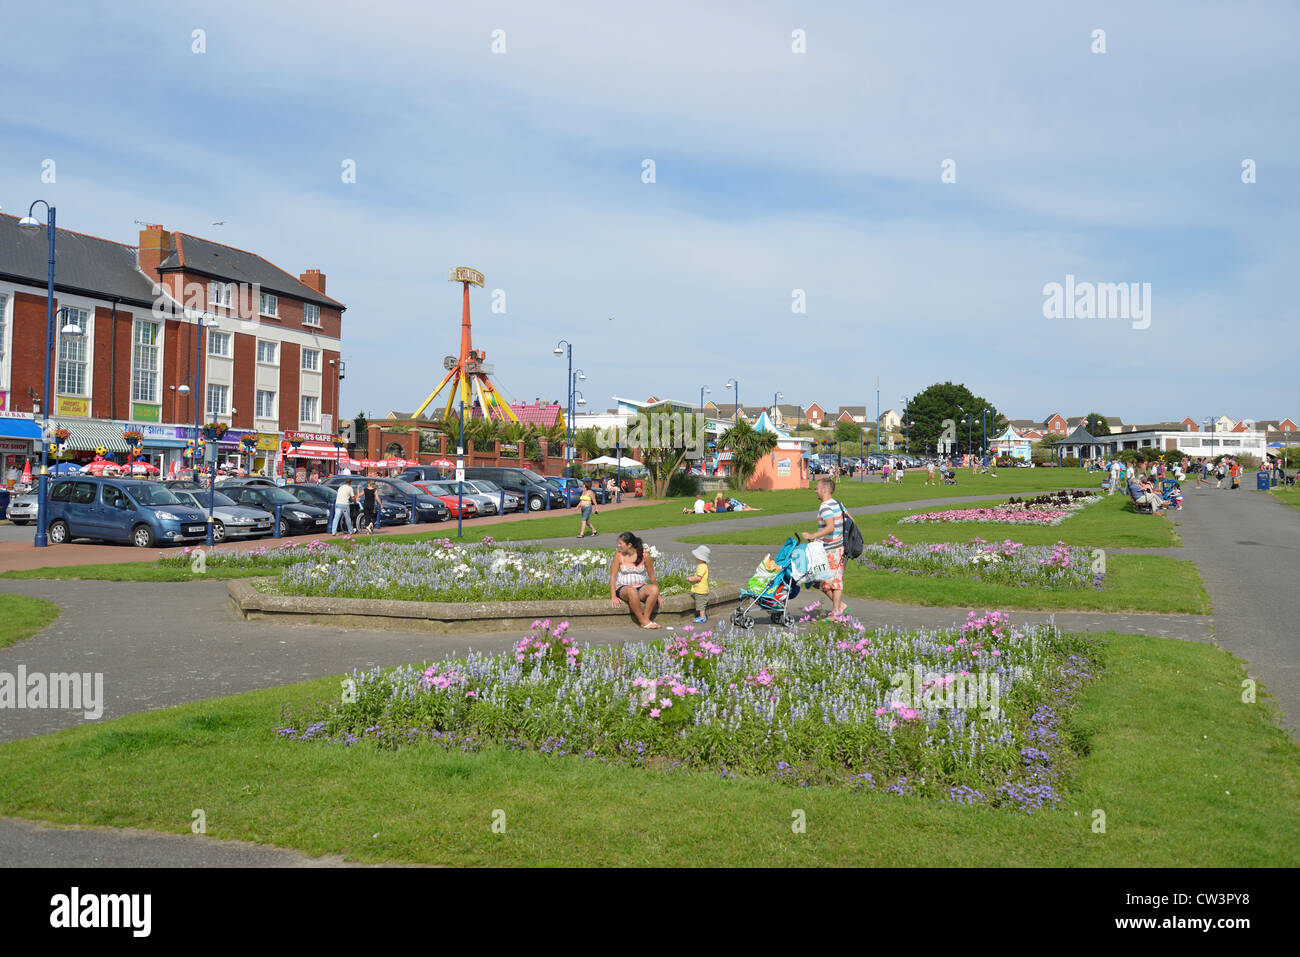 Seafront gardens, Barry Island, Barry, Vale of Glamorgan, Wales, United Kingdom Stock Photo